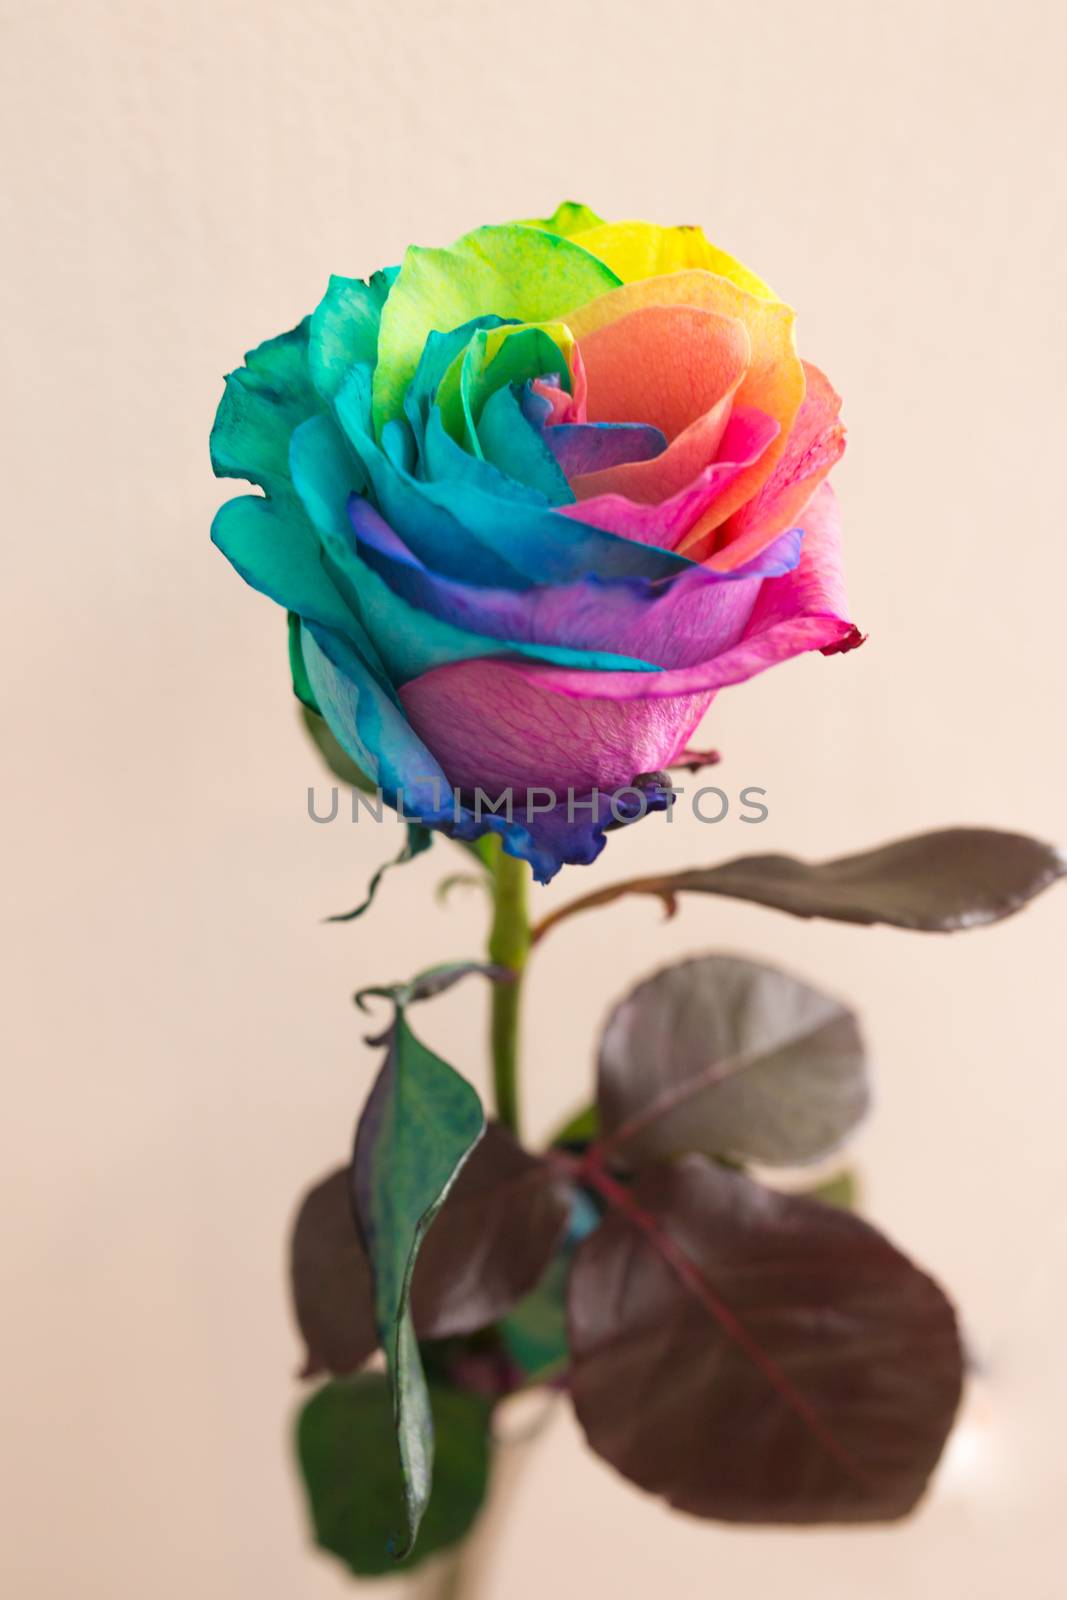 Gay lesbian LGBT rainbow flag made out of whole rose symbolize tolerance.